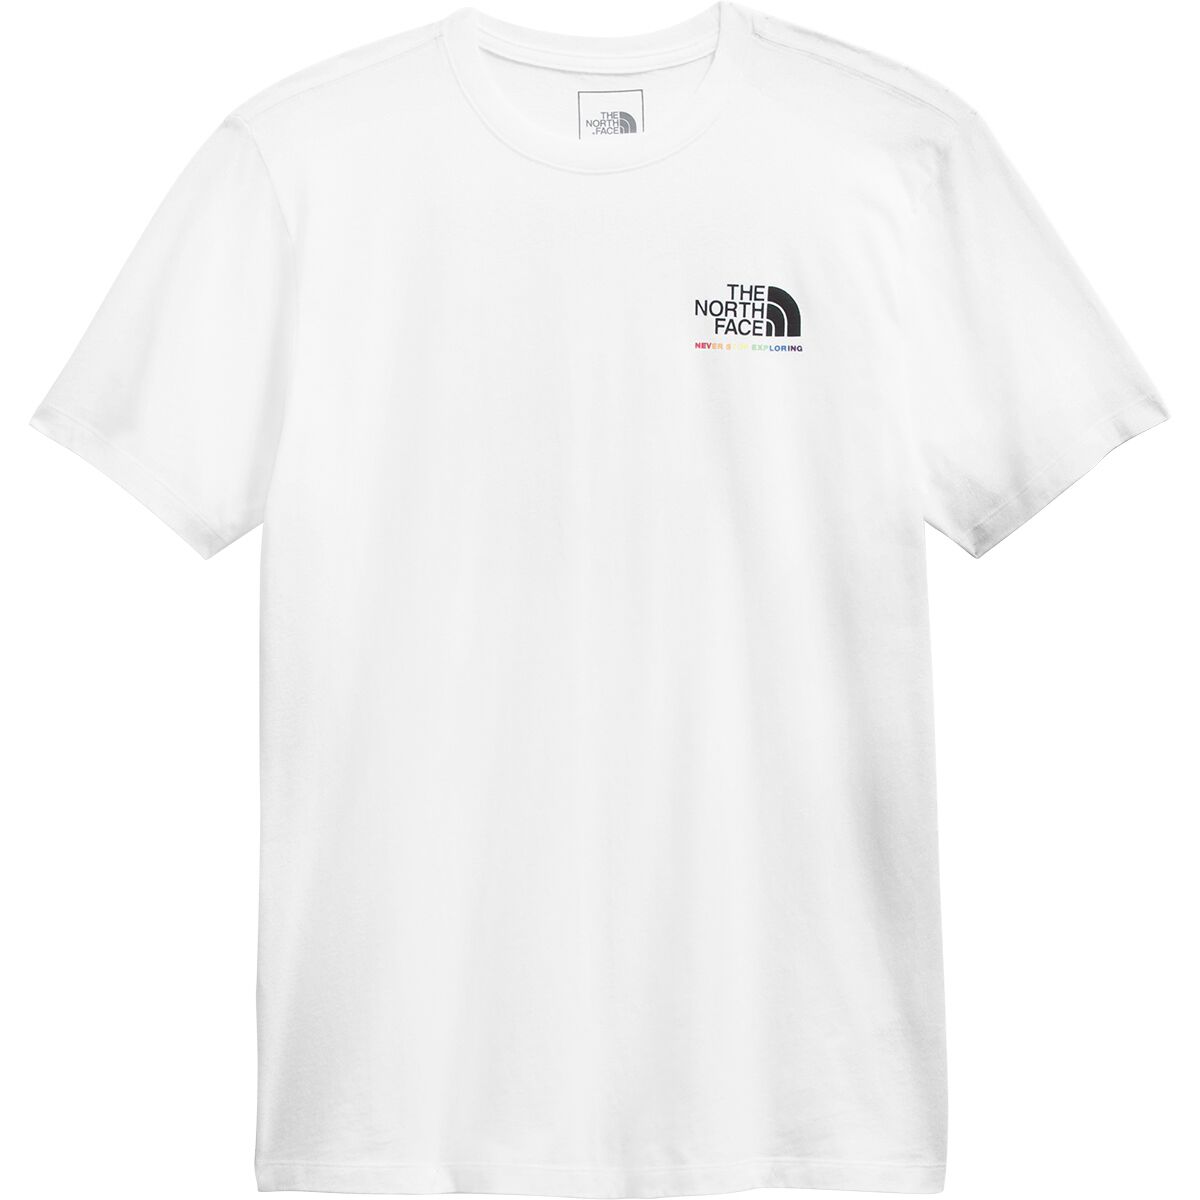 The North Face Pride T-Shirt - Men's